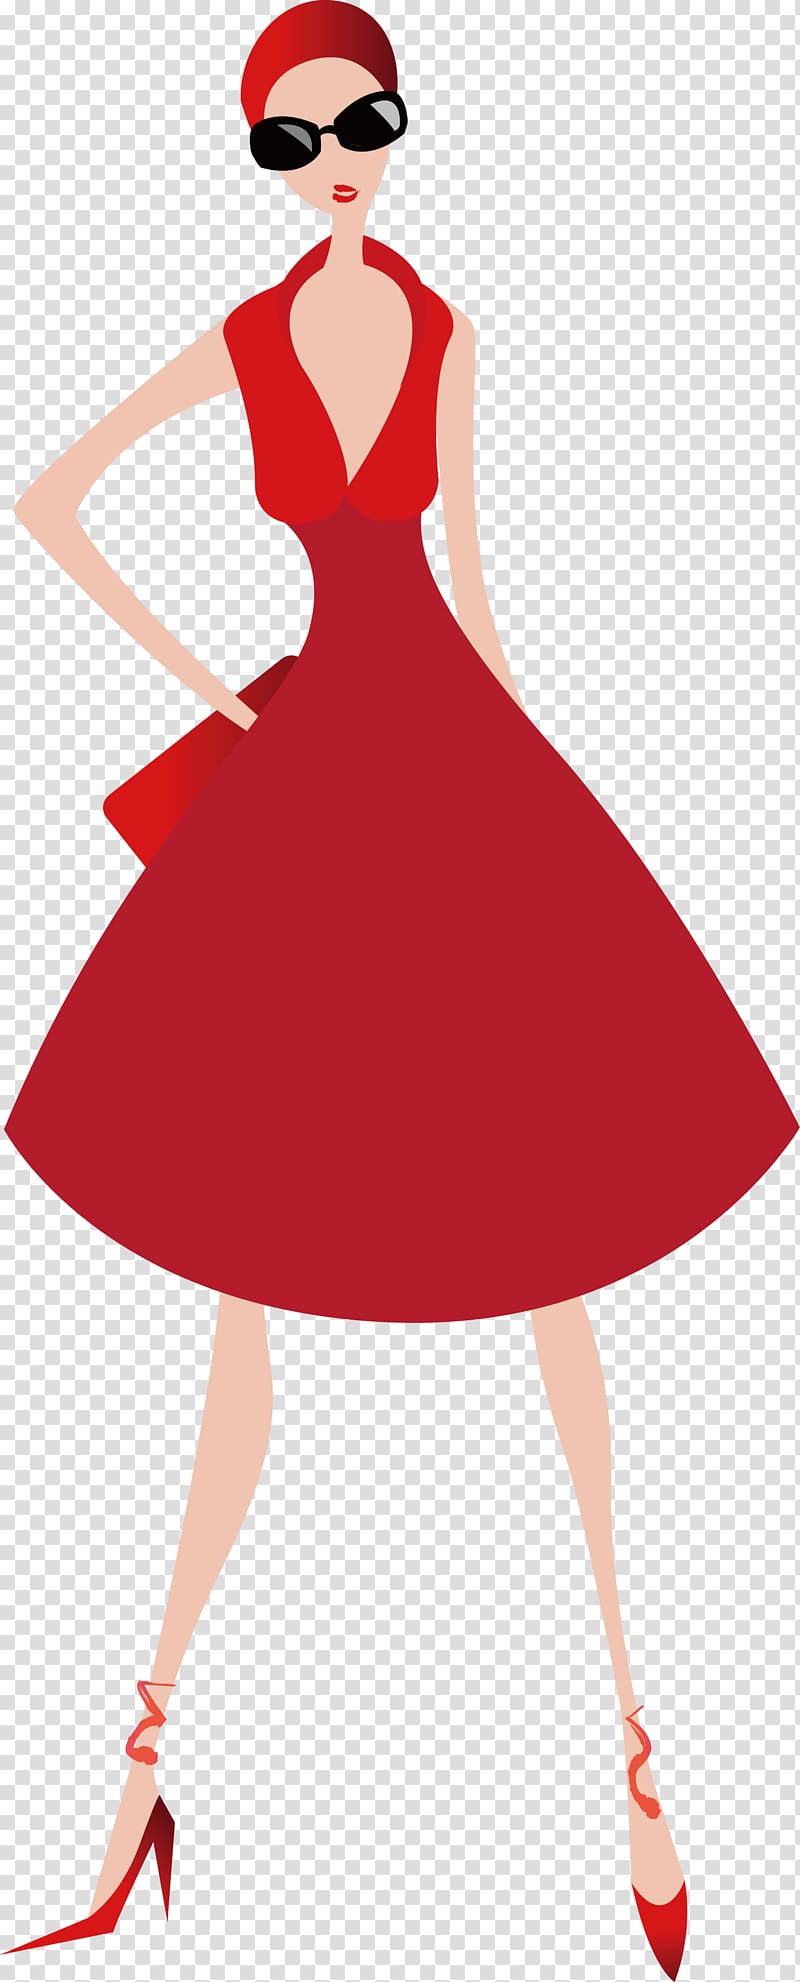 Woman Skirt Illustration, Woman in red dress transparent background PNG cli...